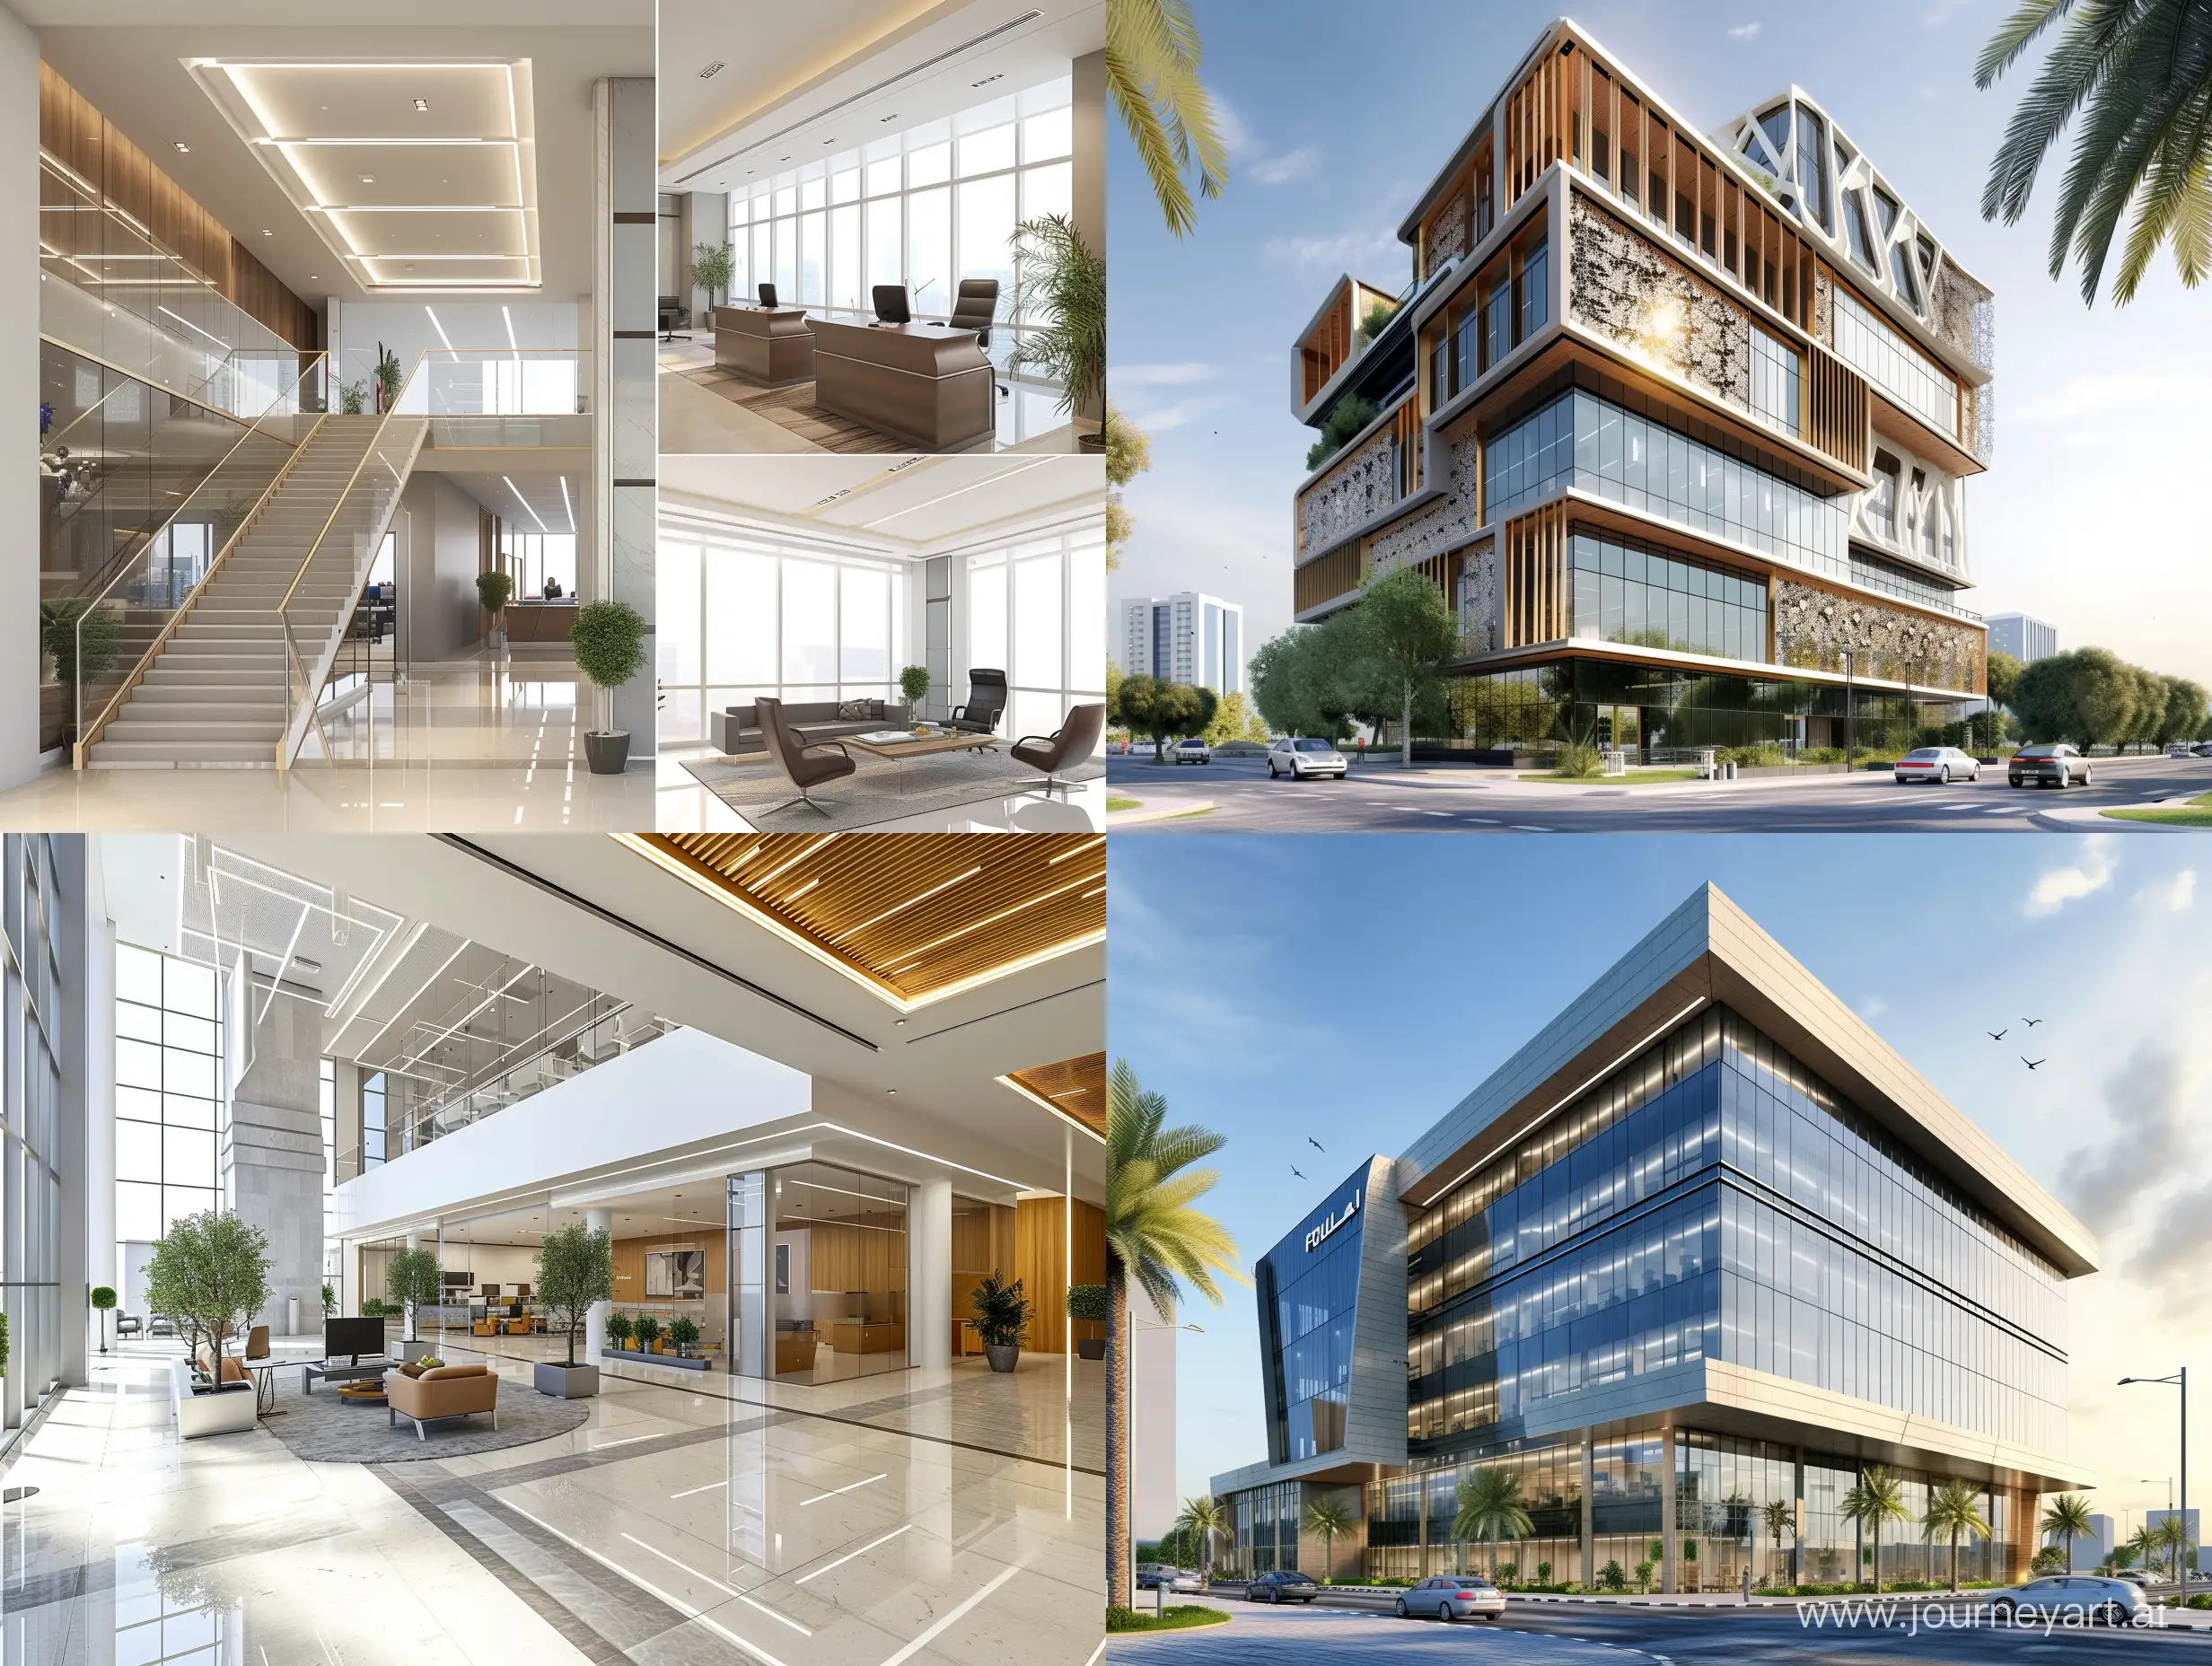 
Designing the office building of Foulad Company